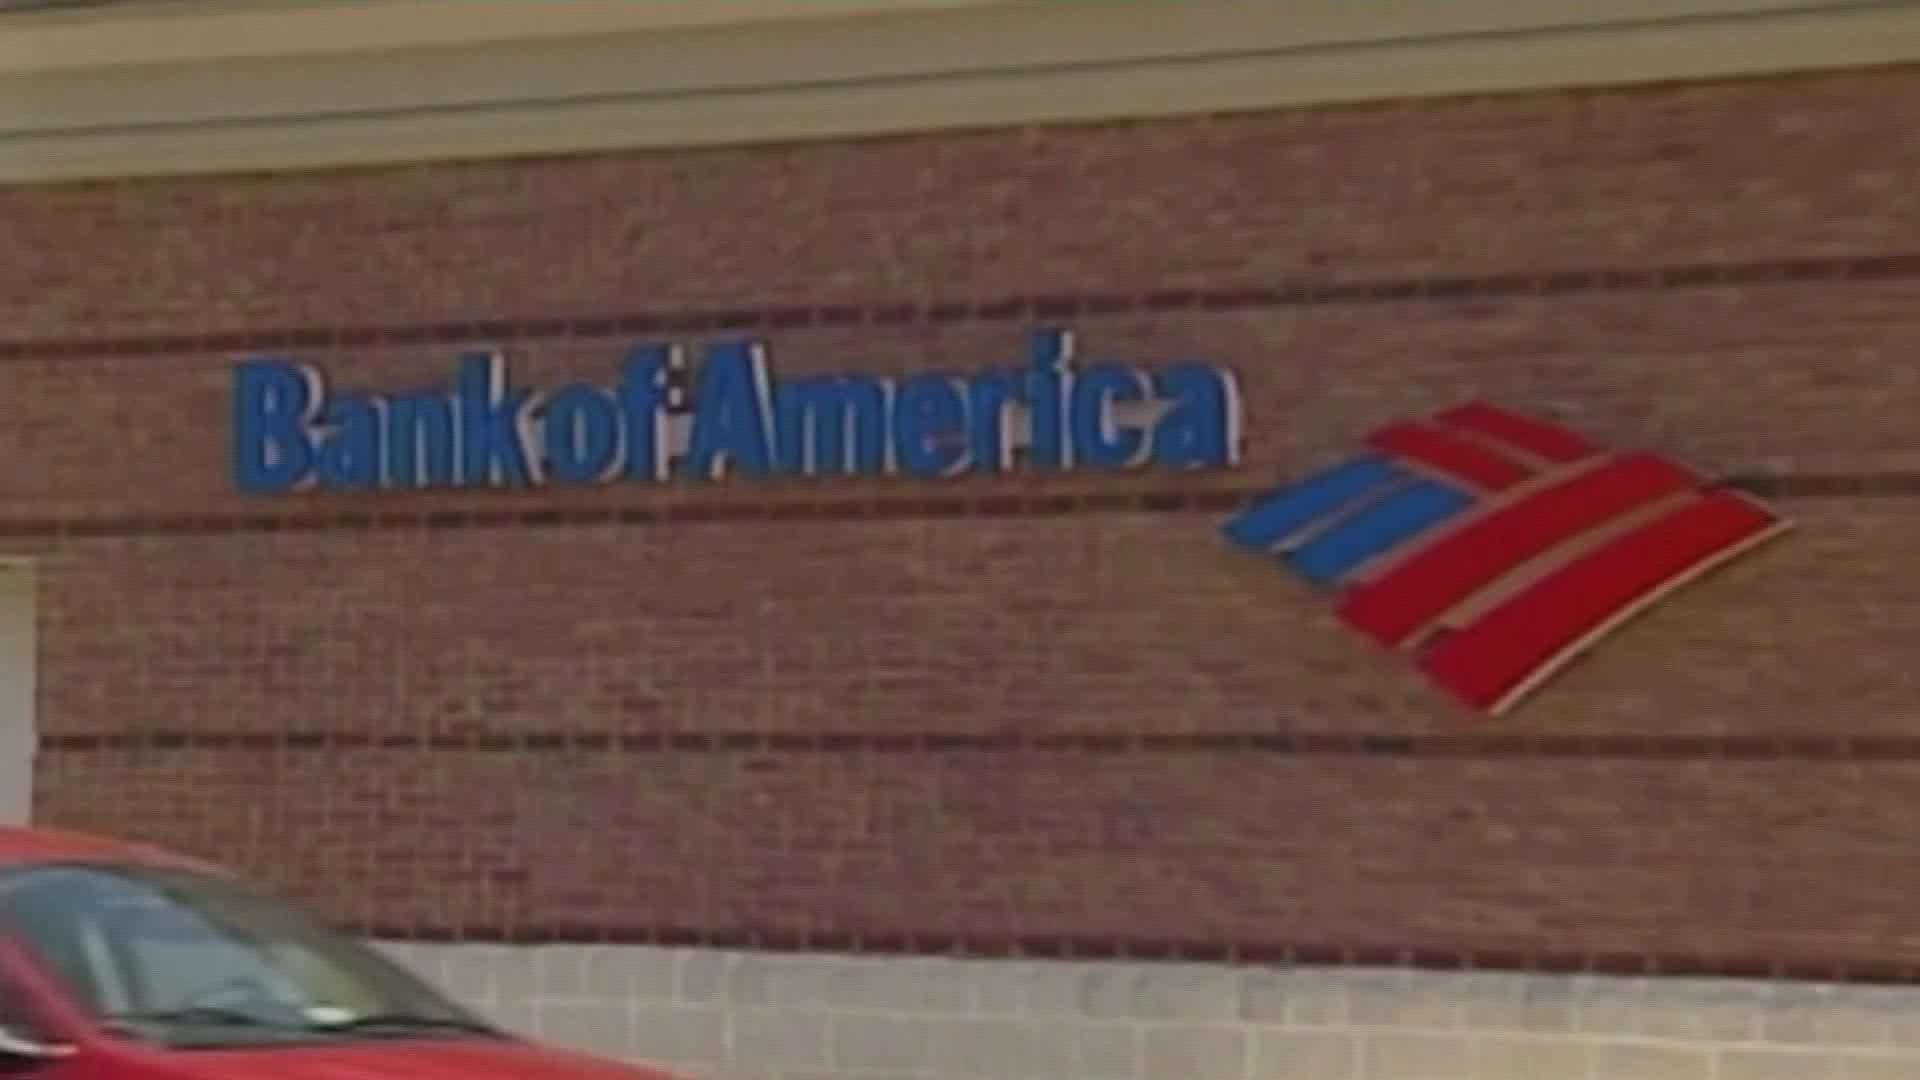 Some Bank of America customers reported recent Zelle transactions were suddenly "missing" from their accounts on Wednesday.